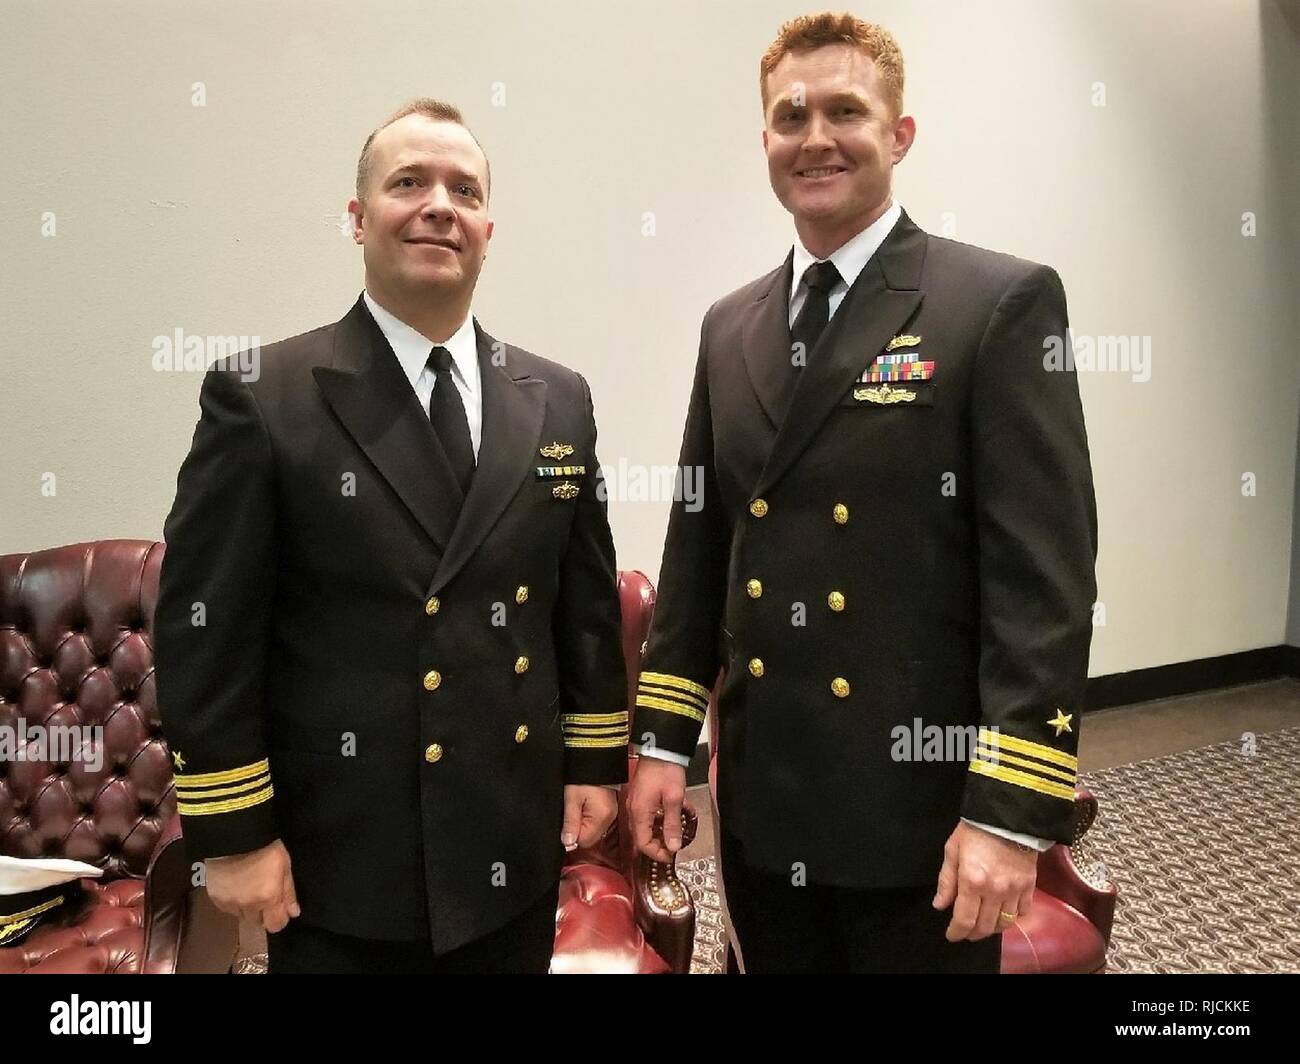 SAN ANGELO, Texas – Lt. Cmdr. Christopher Allen (left) transferred responsibility as the officer in charge of Center for Information Warfare Training (CIWT) Detachment Goodfellow to Lt. Cmdr. Austin Maxwell in a change of charge ceremony. Stock Photo